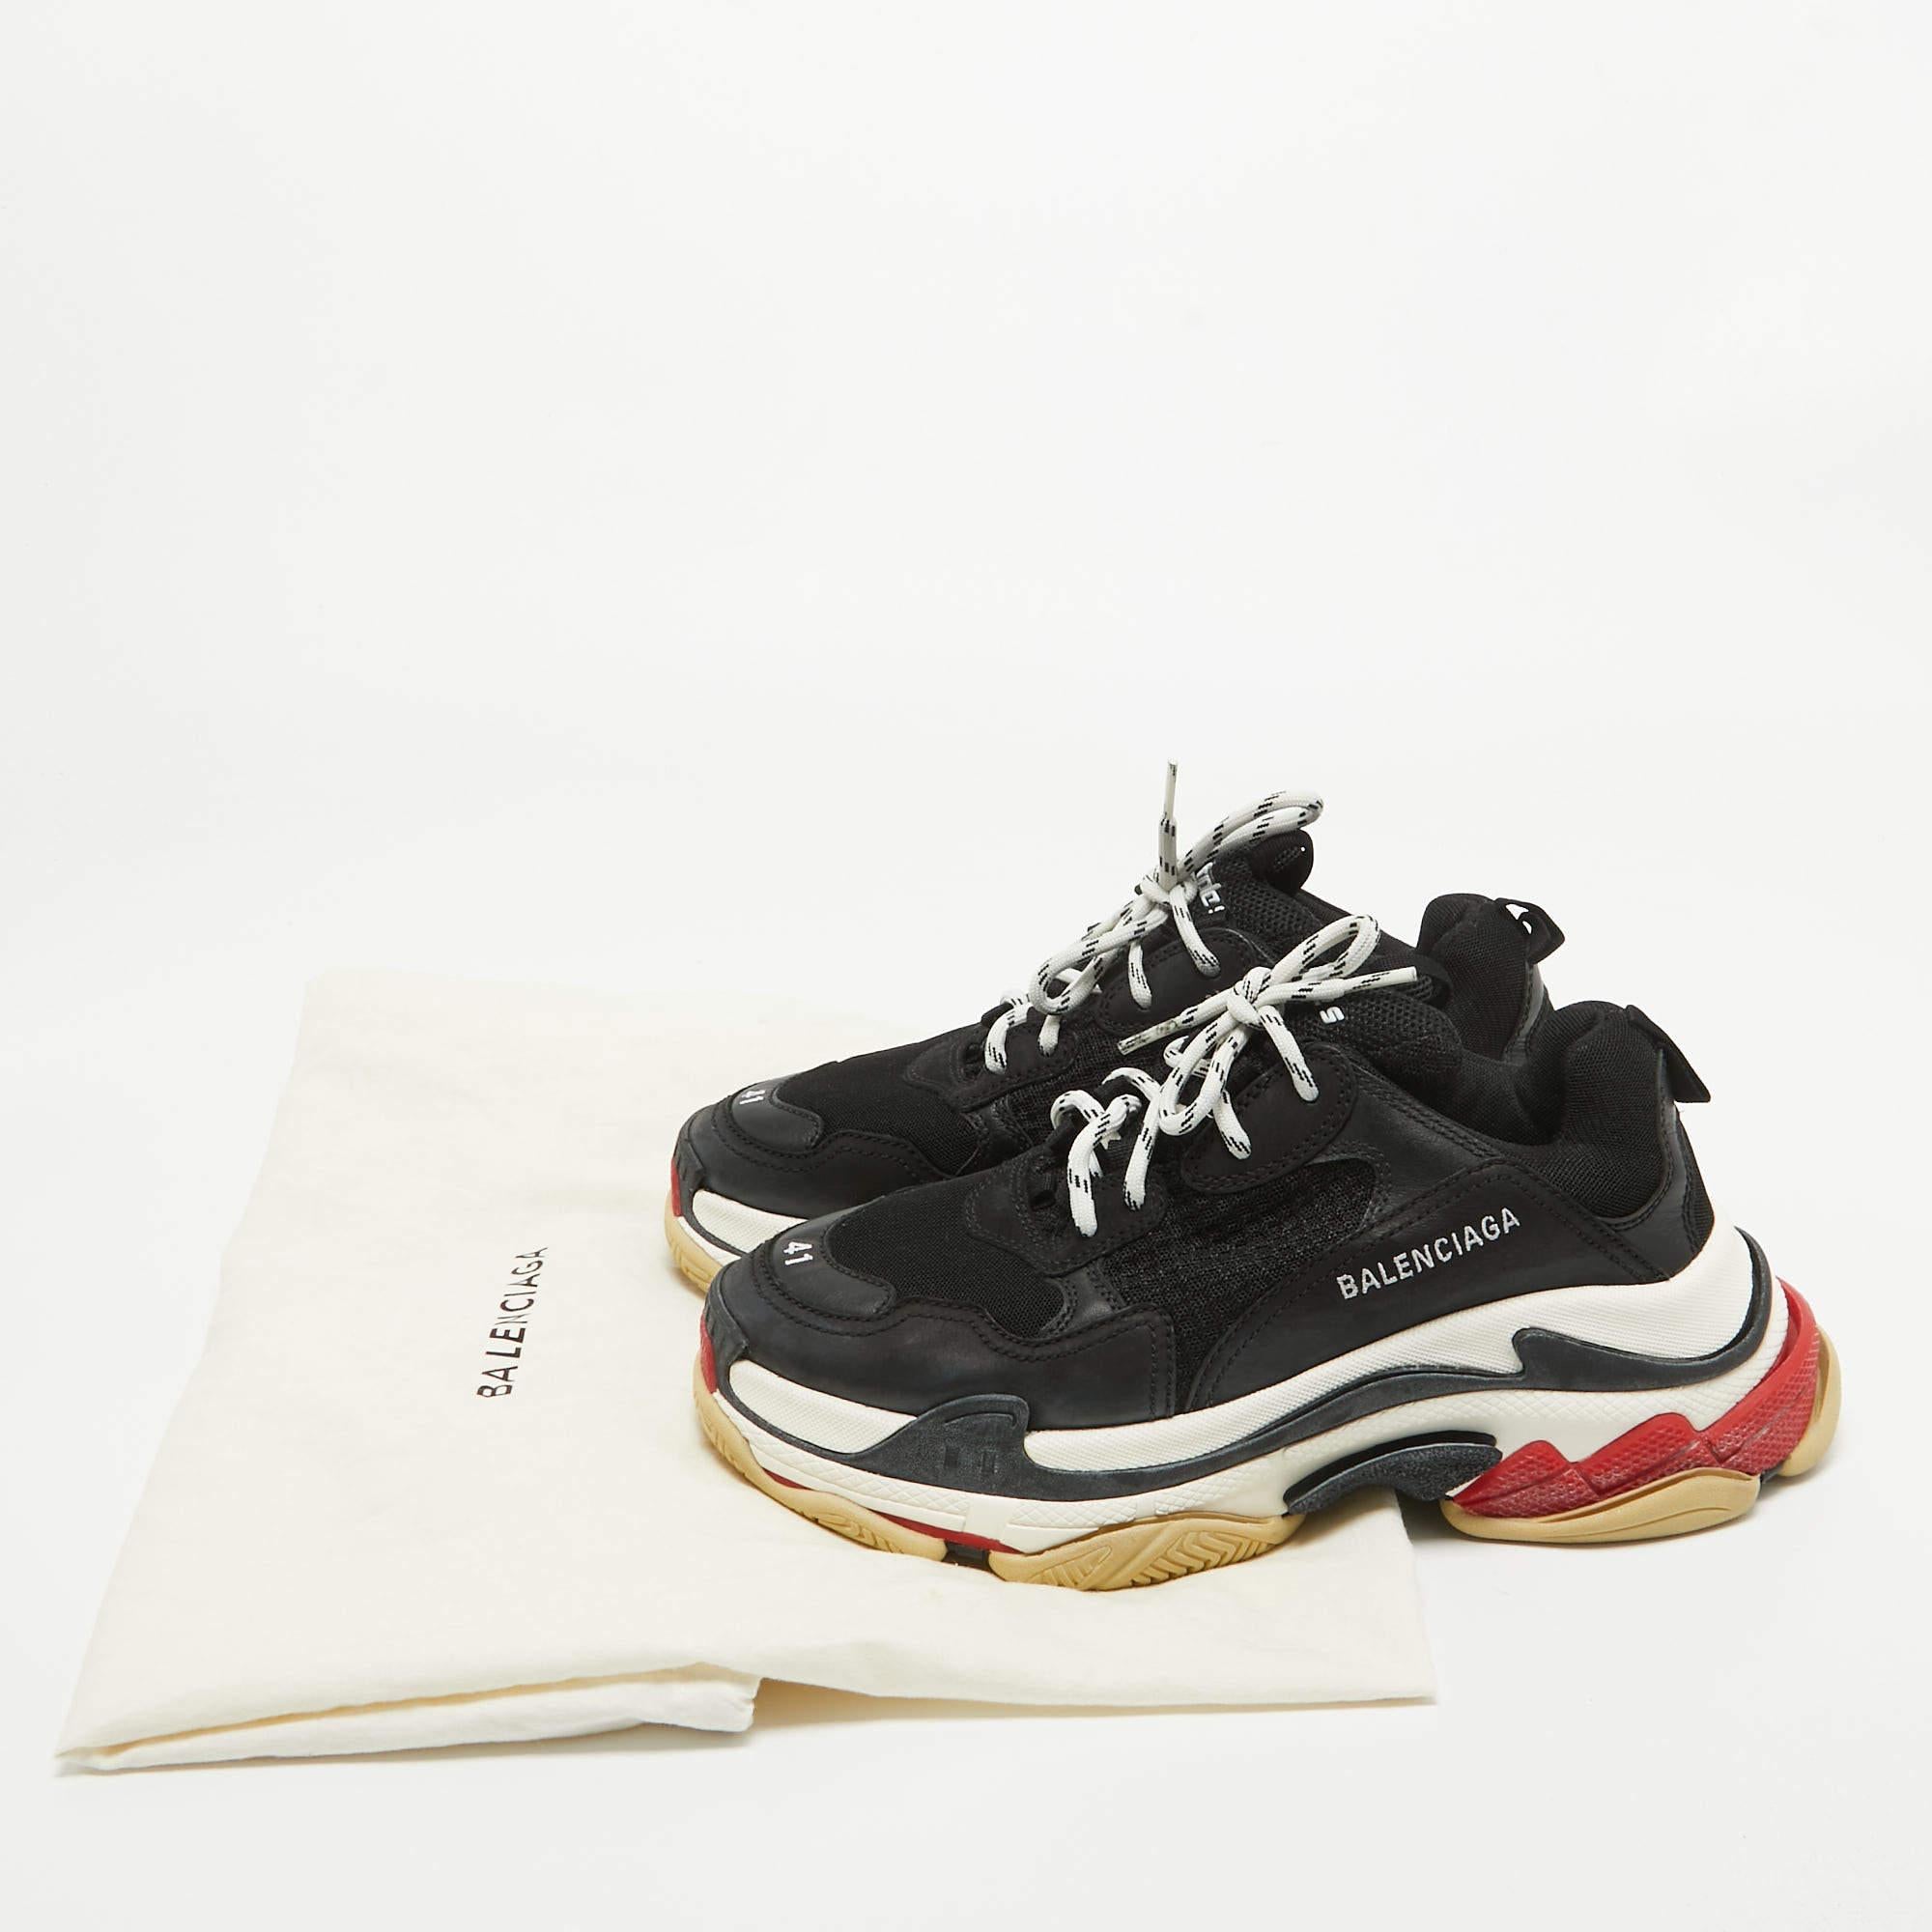 Balenciaga Black Mesh and Leather Triple S Low Top Sneakers Size 40 For Sale 5